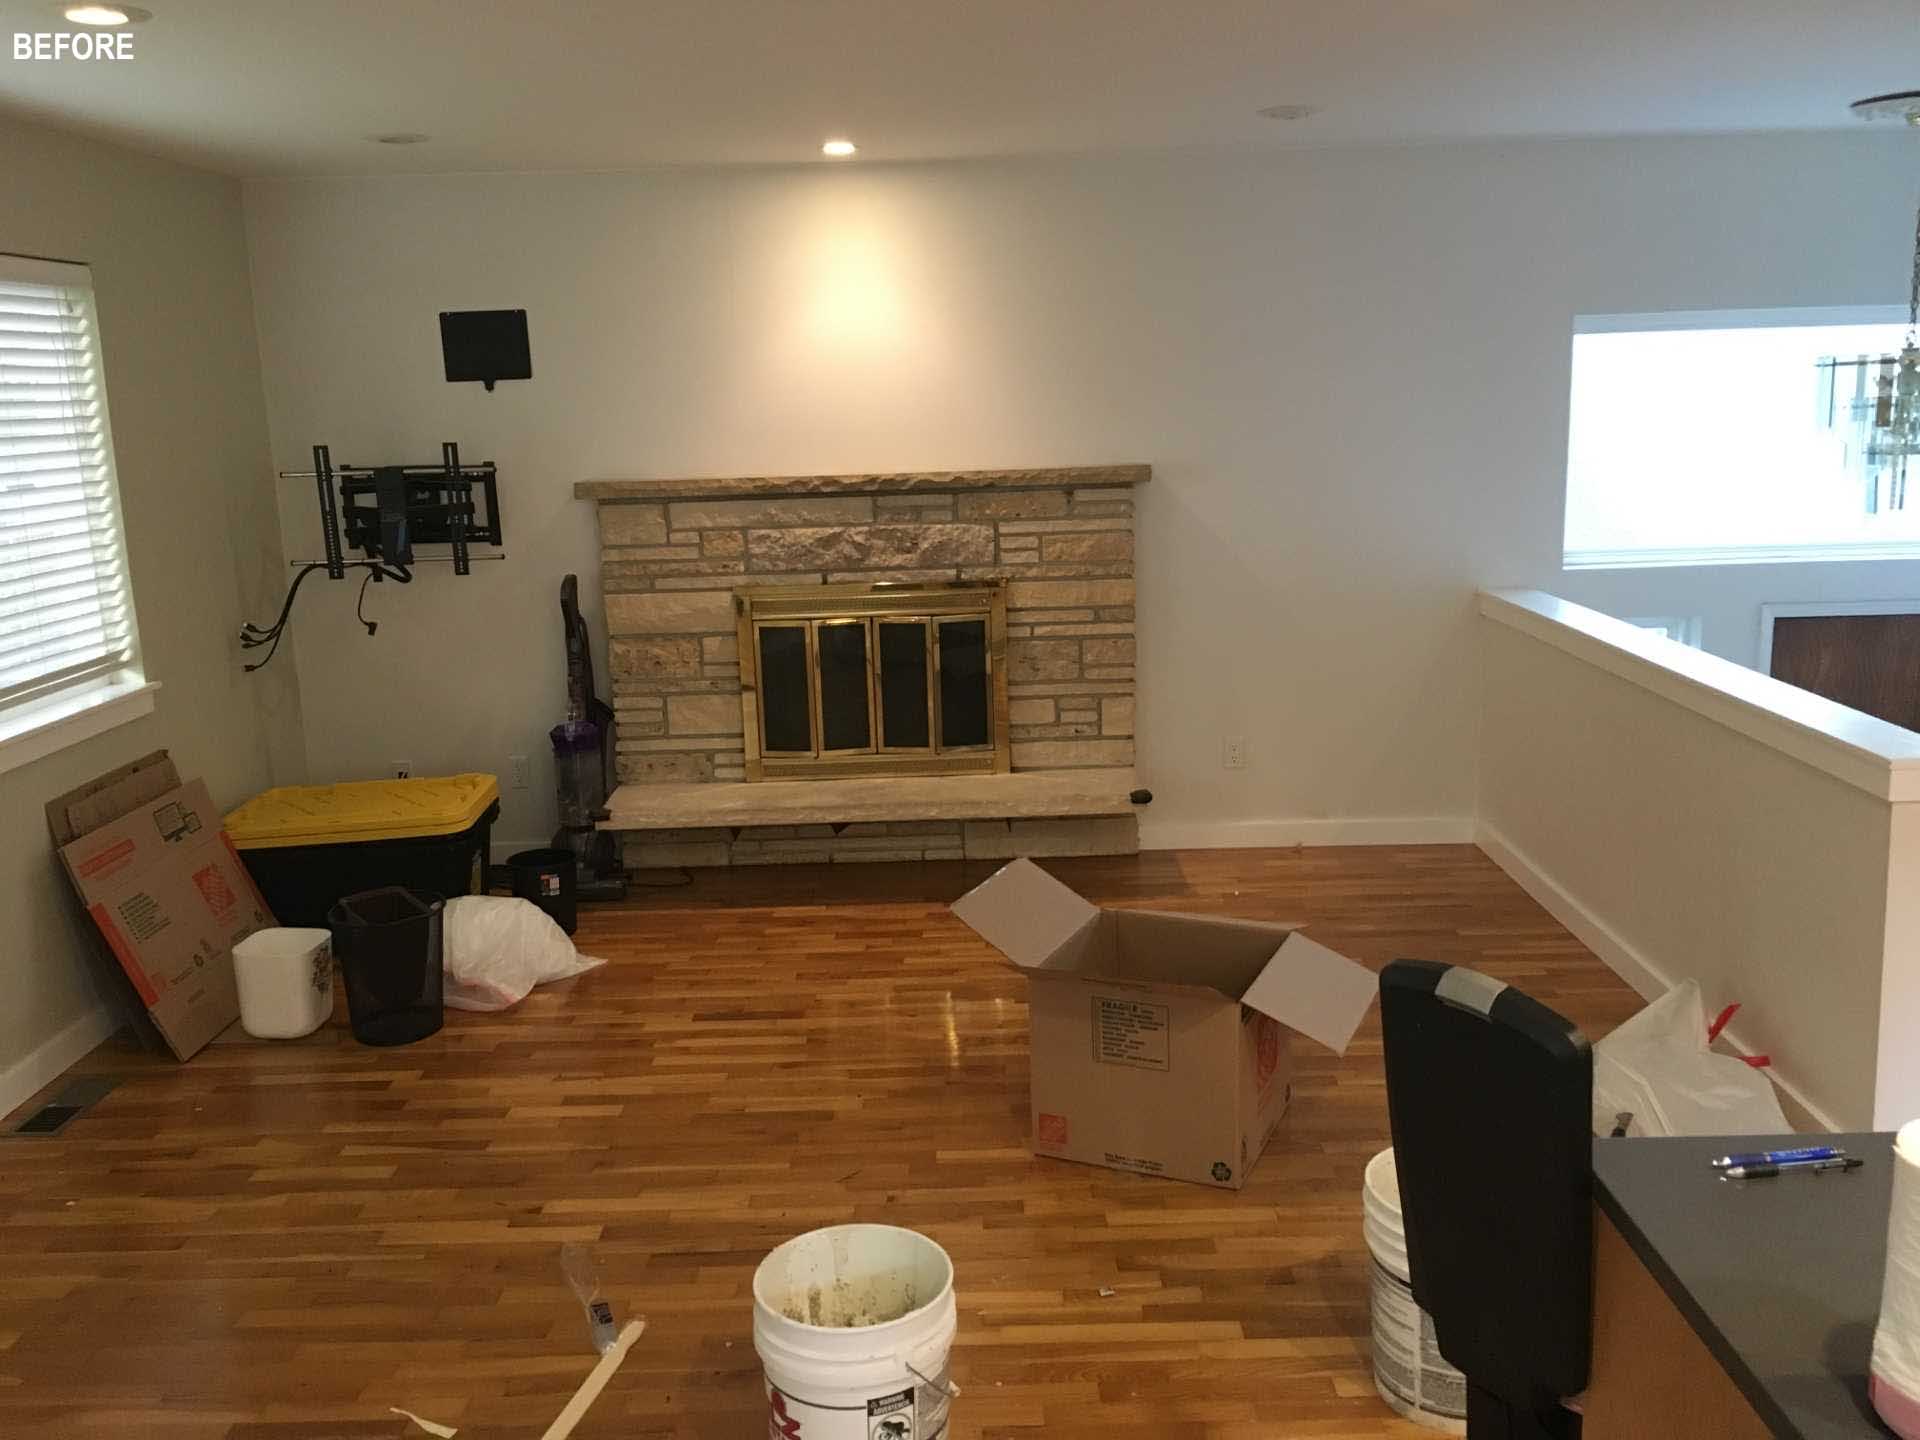 A living room before the remodel.